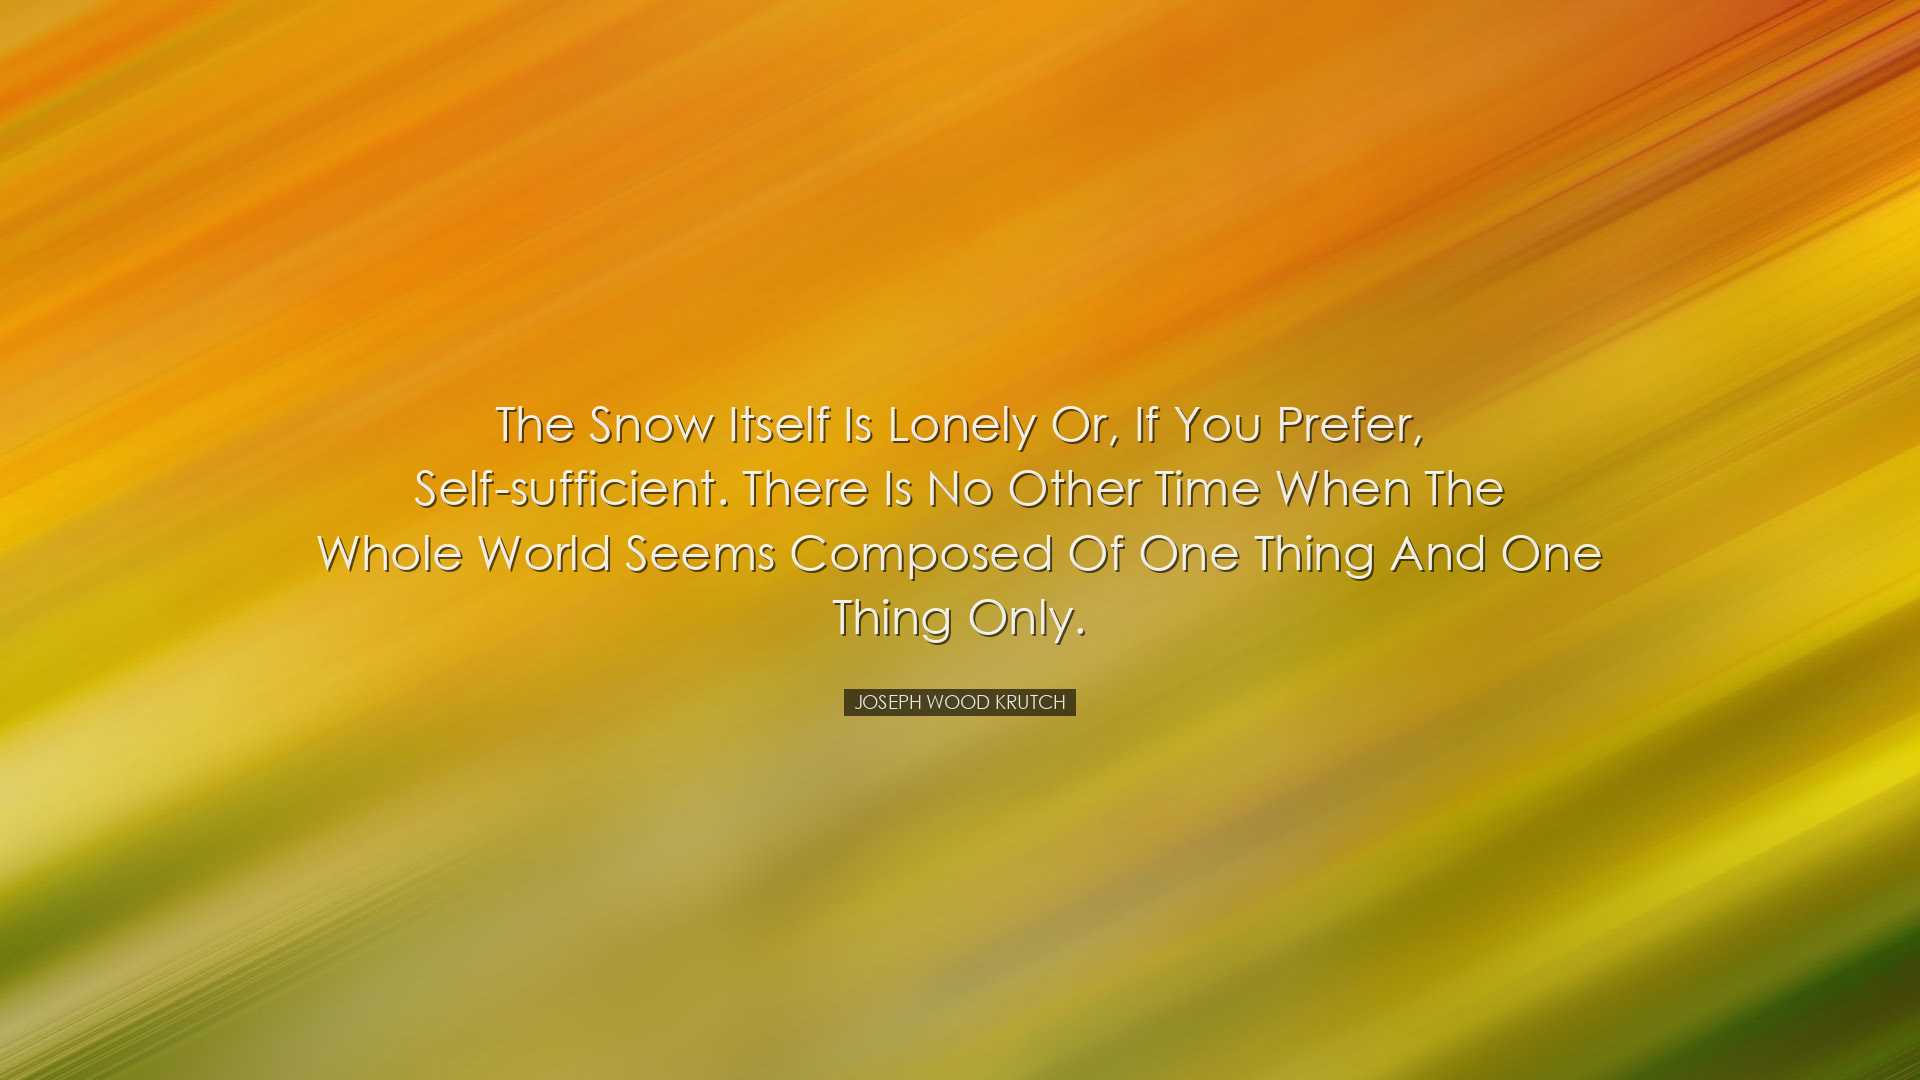 The snow itself is lonely or, if you prefer, self-sufficient. Ther